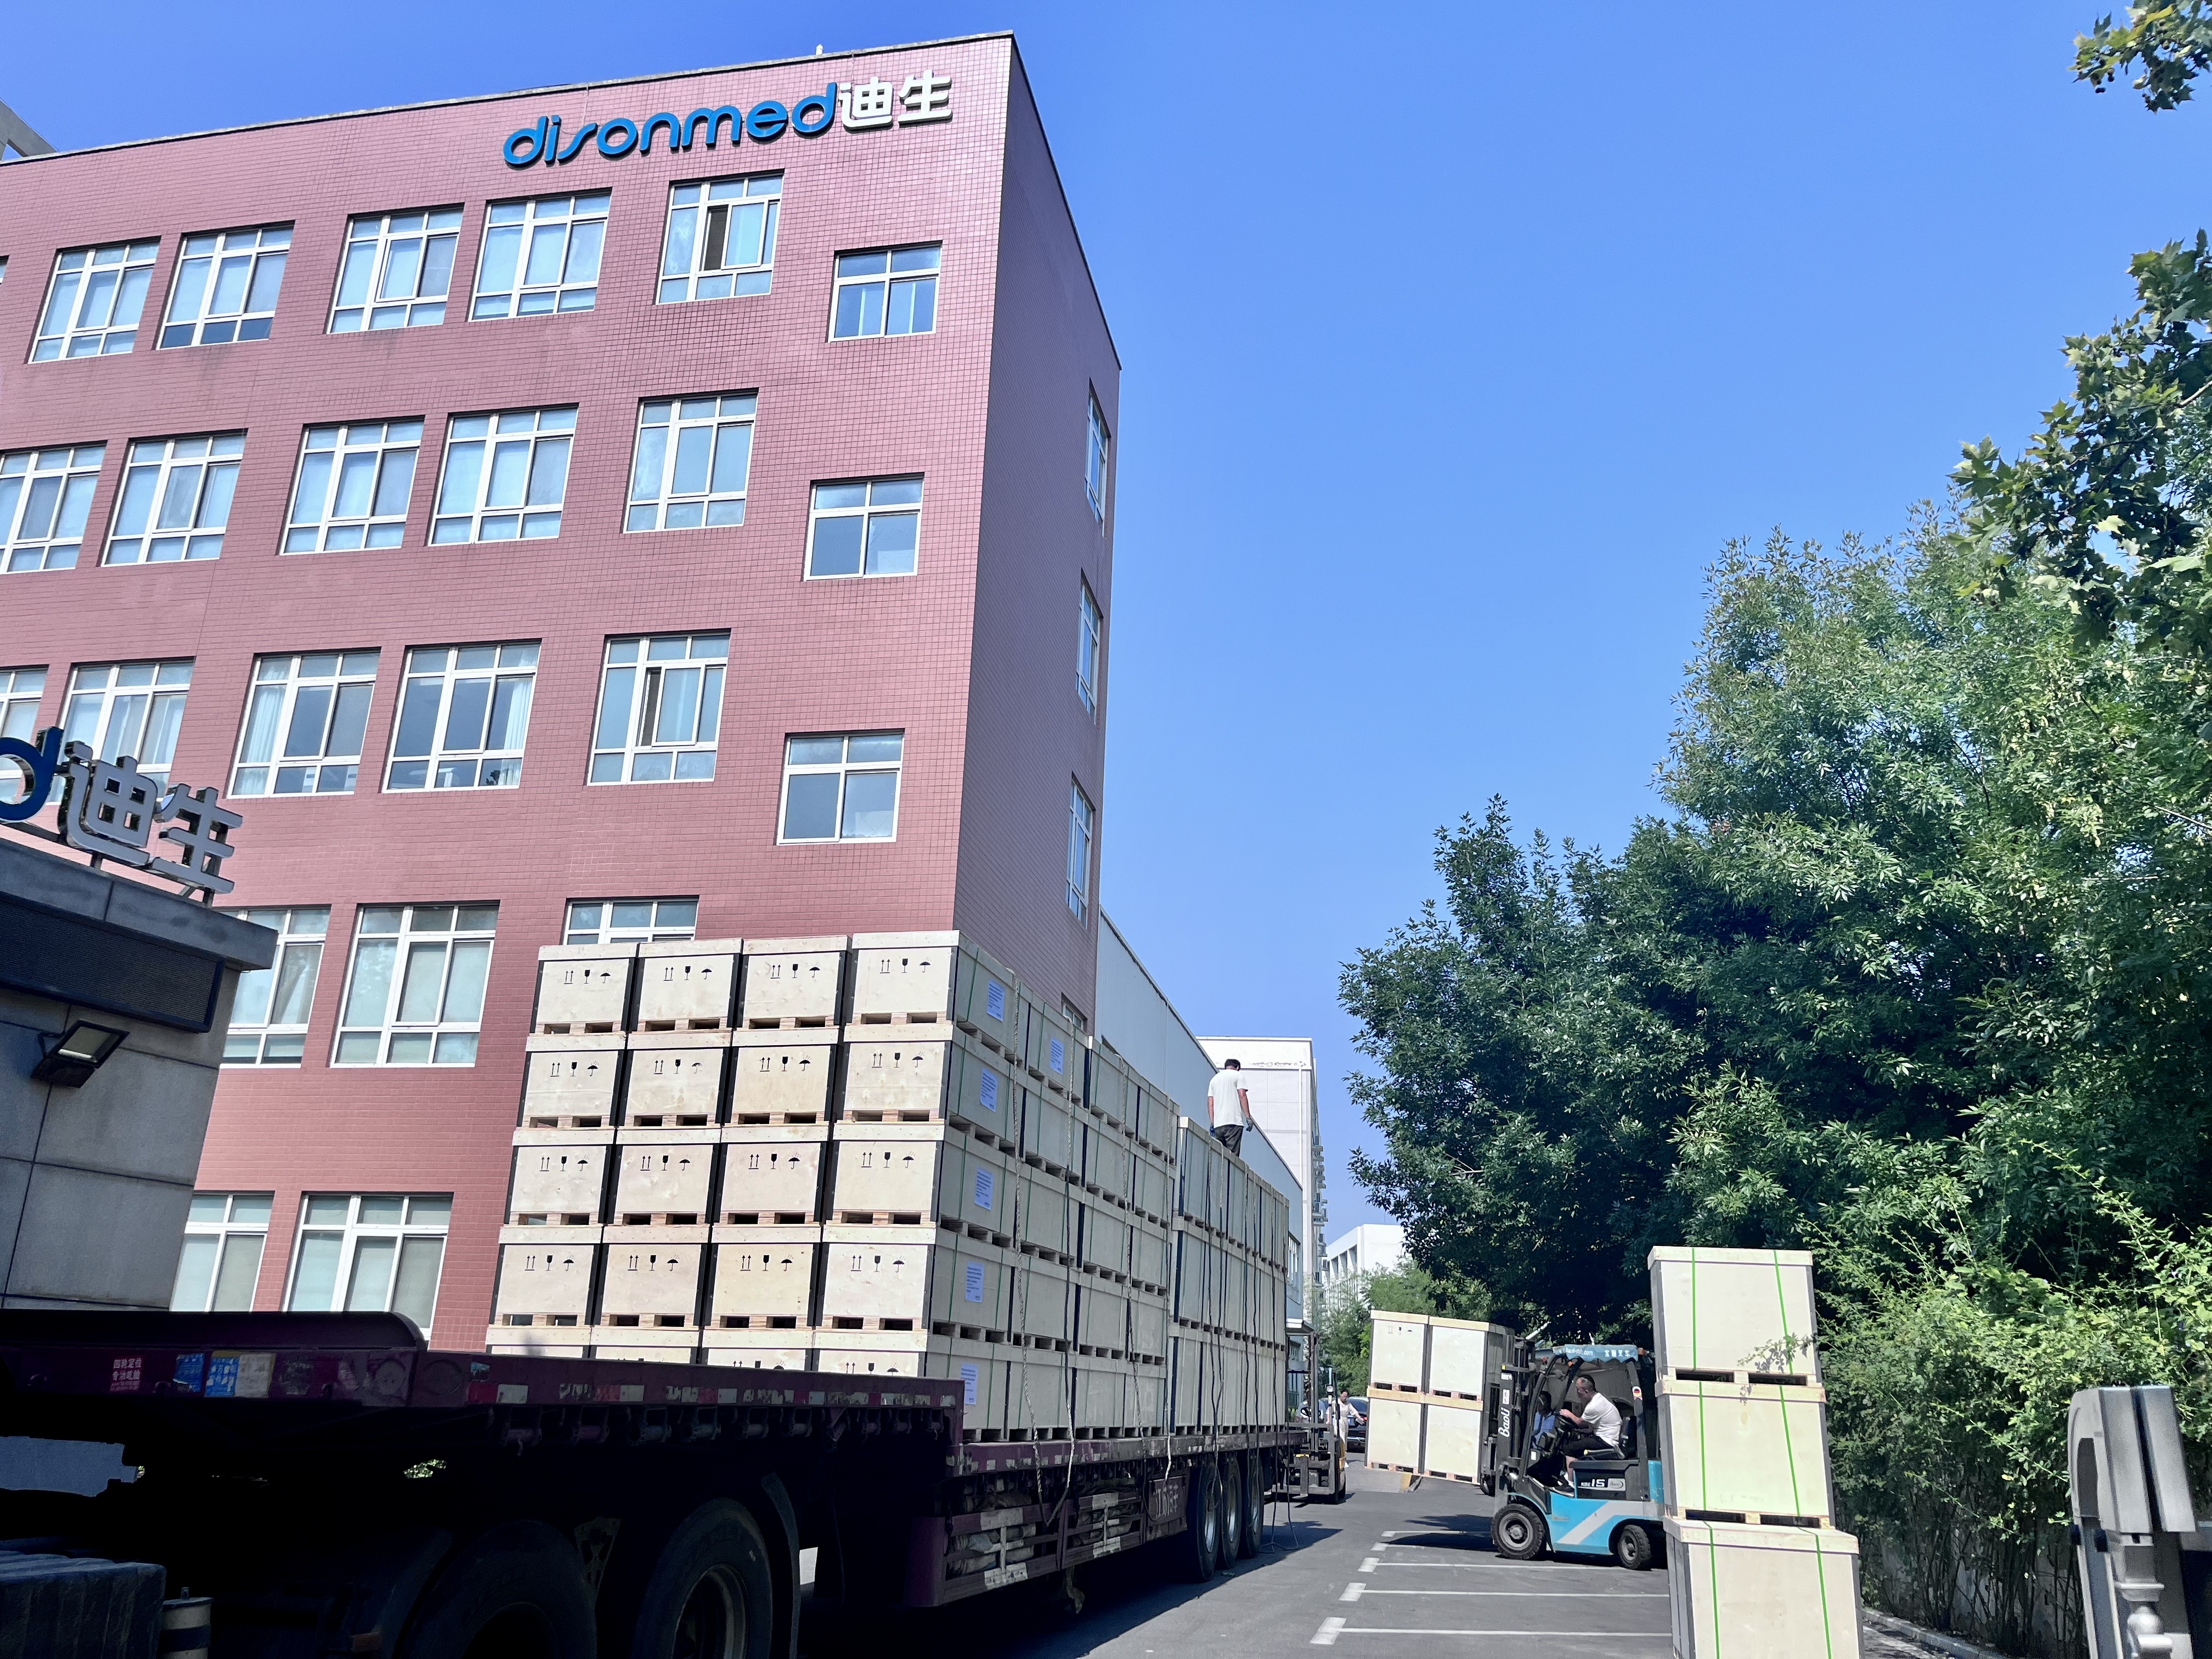 It is the rhythm of Daily shipment in Disonmed.